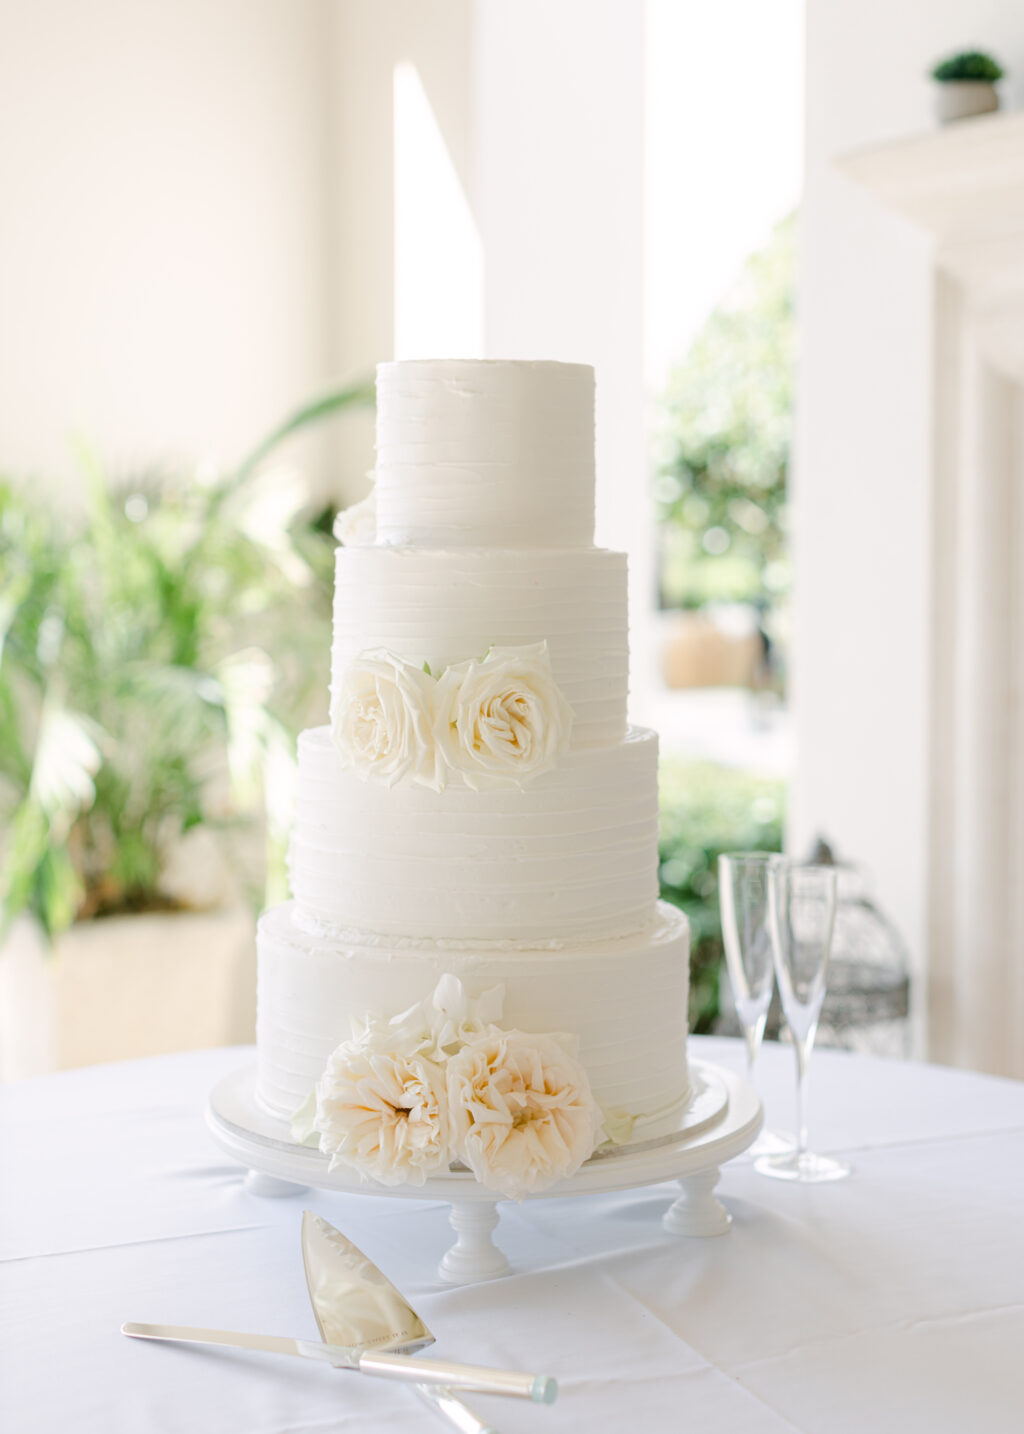 Classic Four-Tiered Round Buttercream Textured Wedding Cake with White Garden Rose Accents